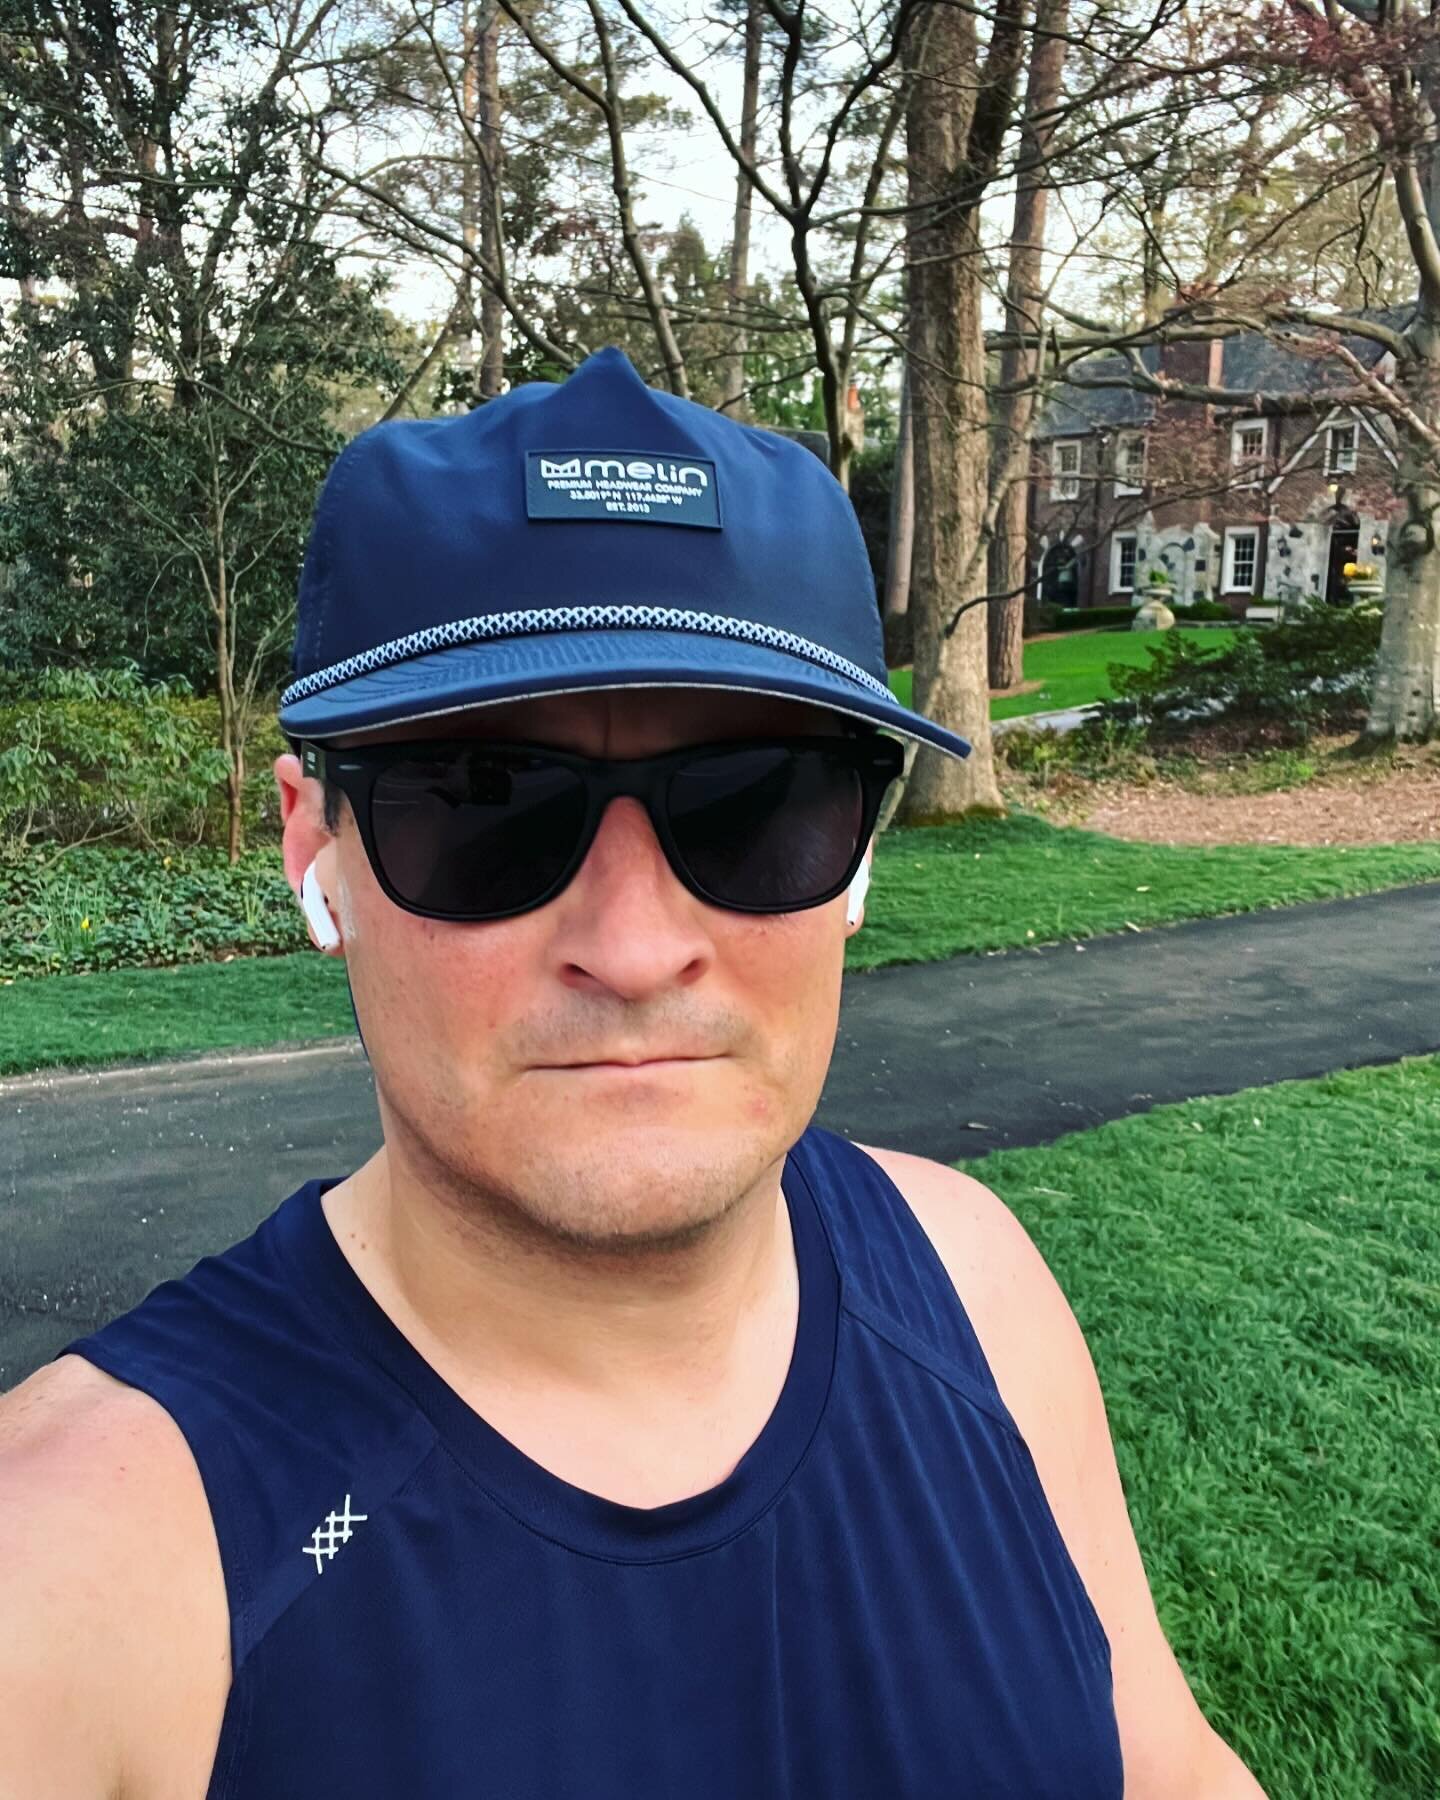 @runningsuckstc finally busted out the tank top yesterday. Got a #5milerun in on my way to @whitehall_tavern. Glad I got that run in because today&rsquo;s weather is not so great.  I&rsquo;m hoping to get some miles in this weekend to catch up to @go